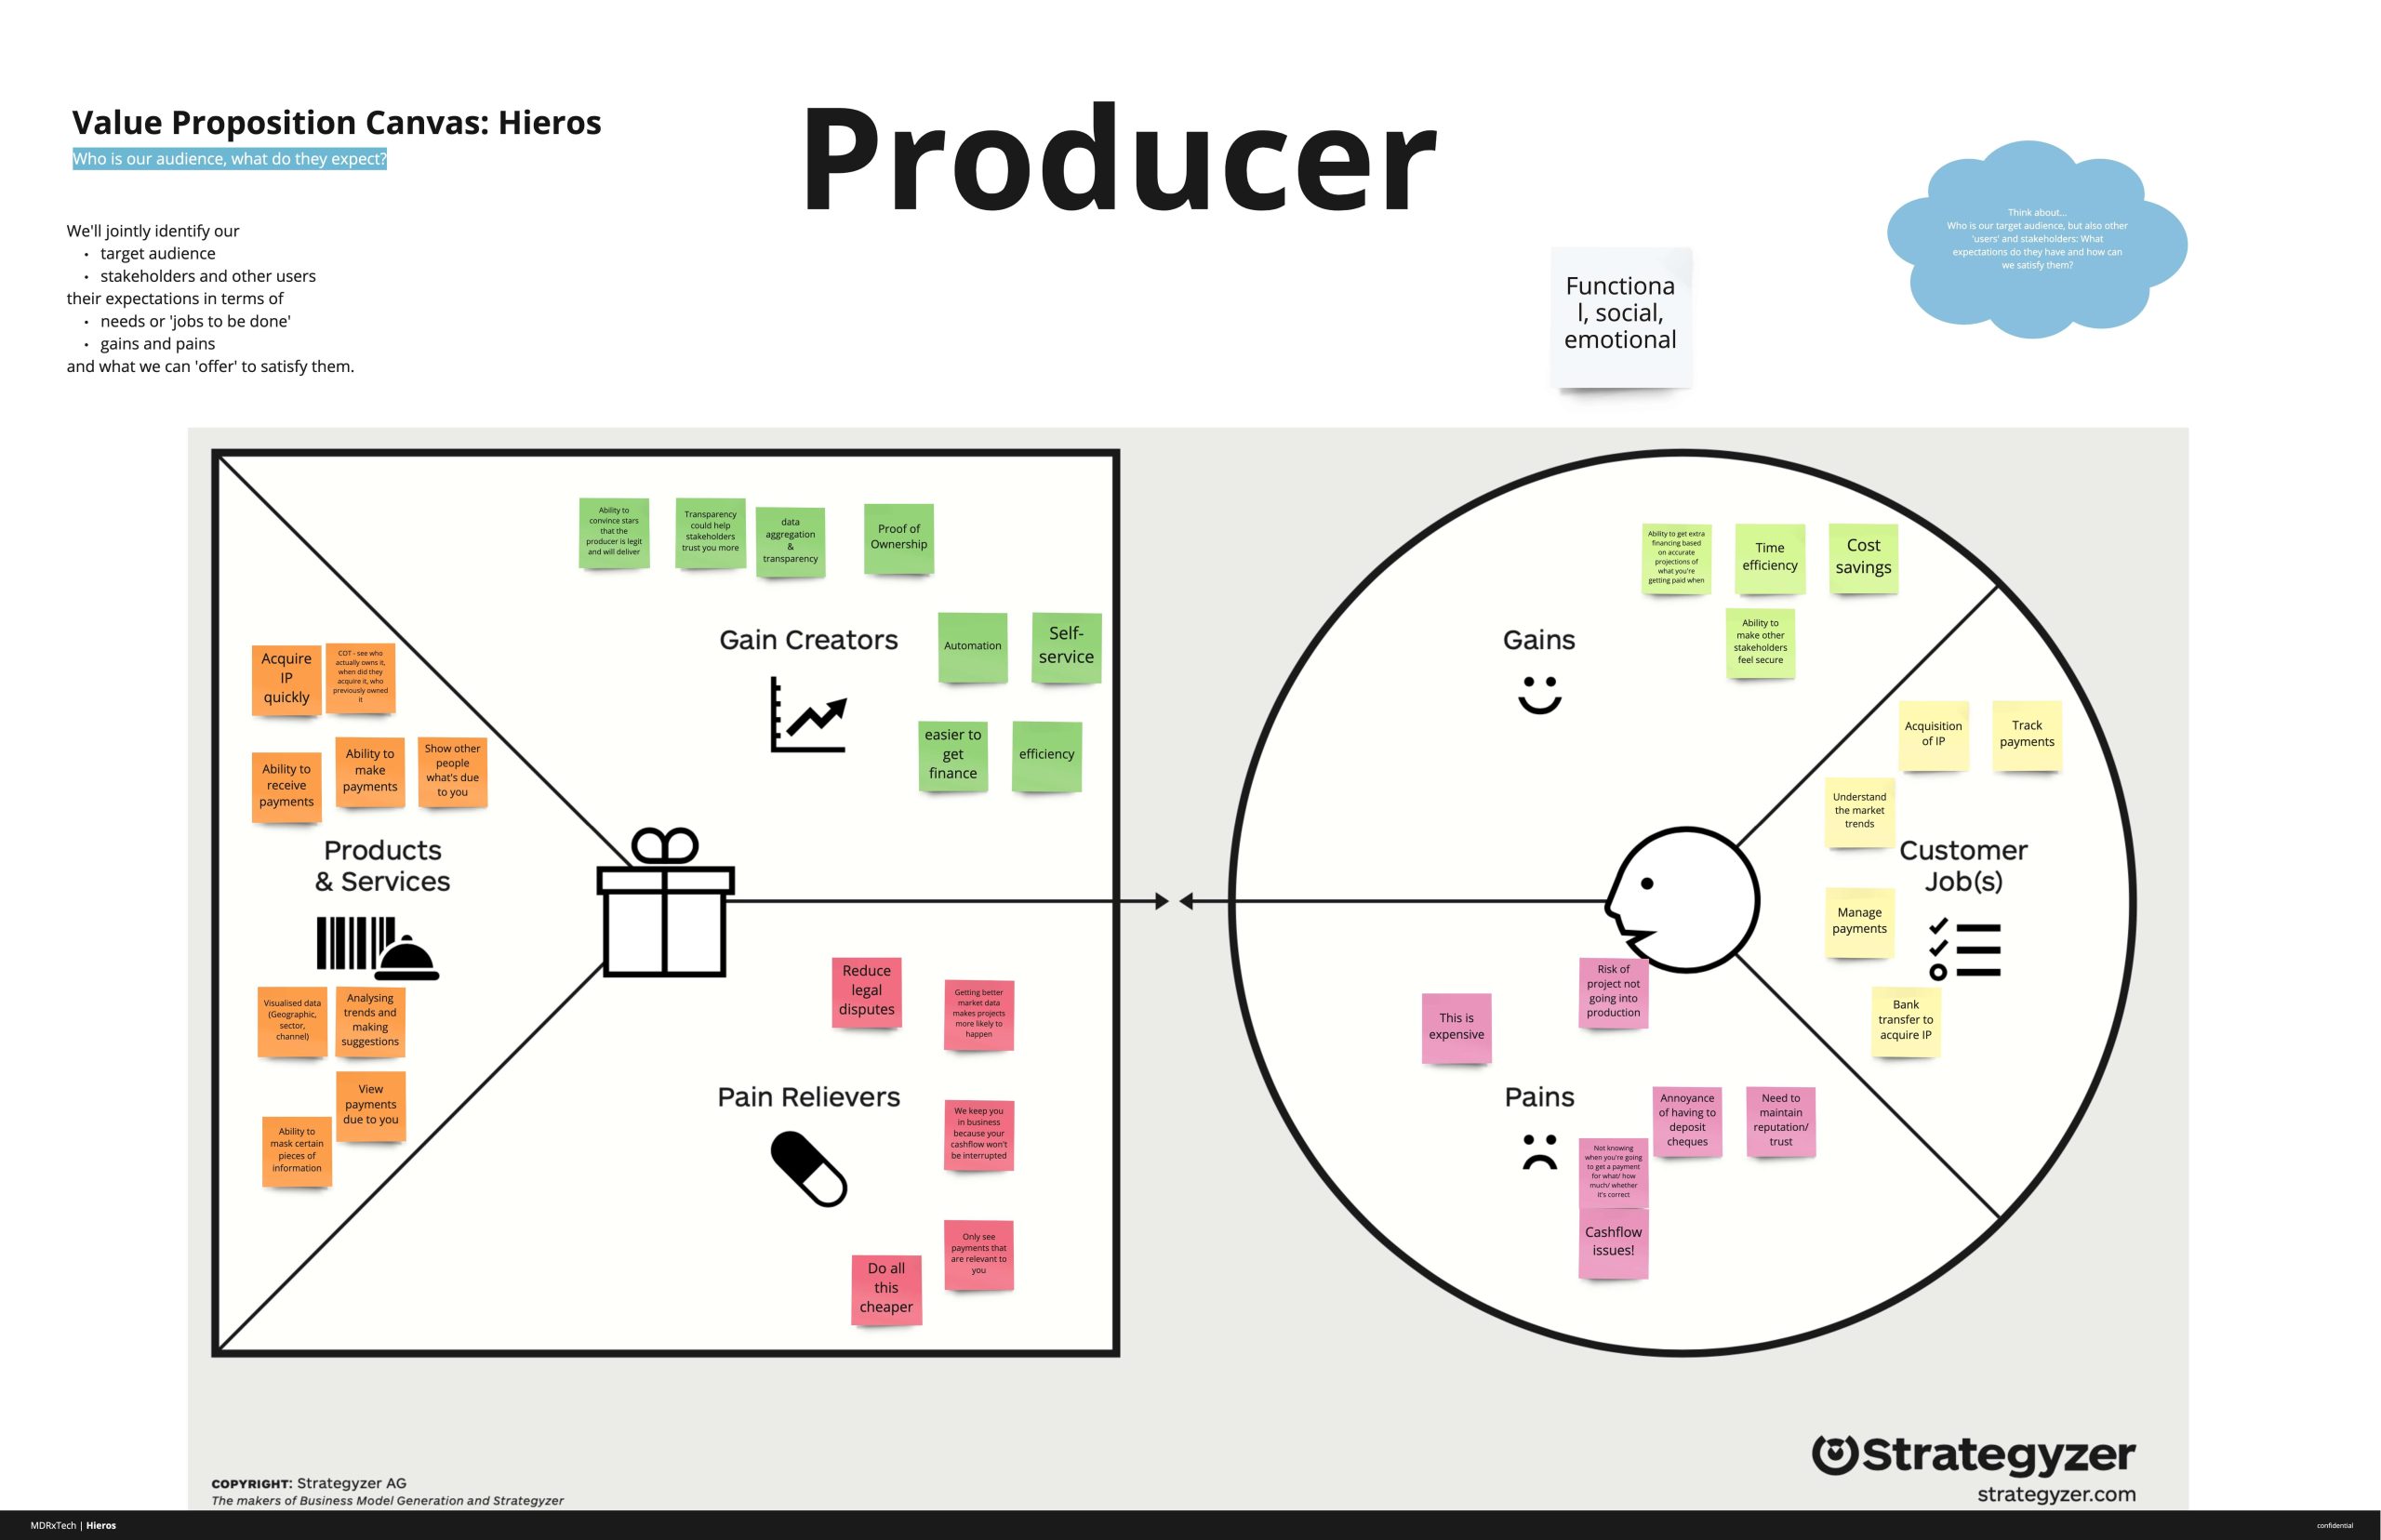 Hieros Discovery - Value proposition canvas_ Persona 1 (1)